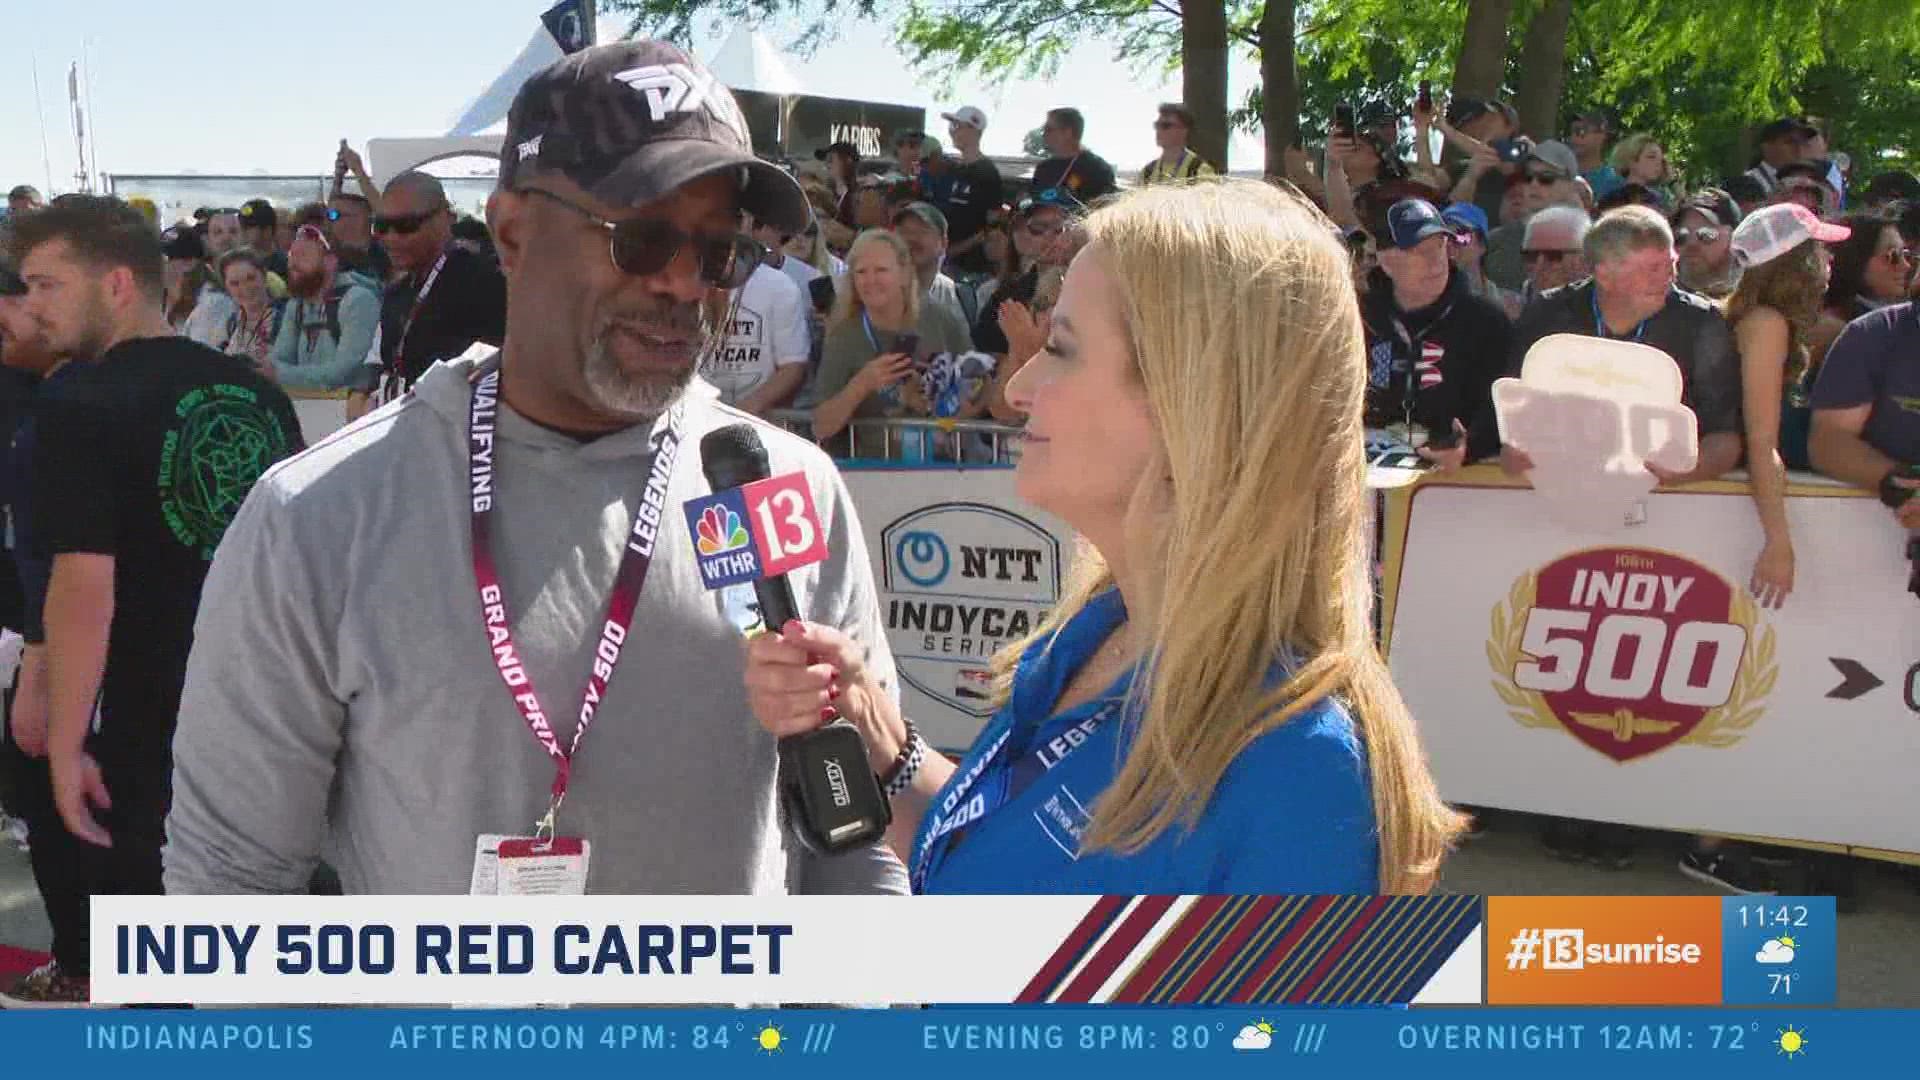 Recording artist Darius Rucker joined Laura Steele on the Red Carpet before Sunday's Indy 500.